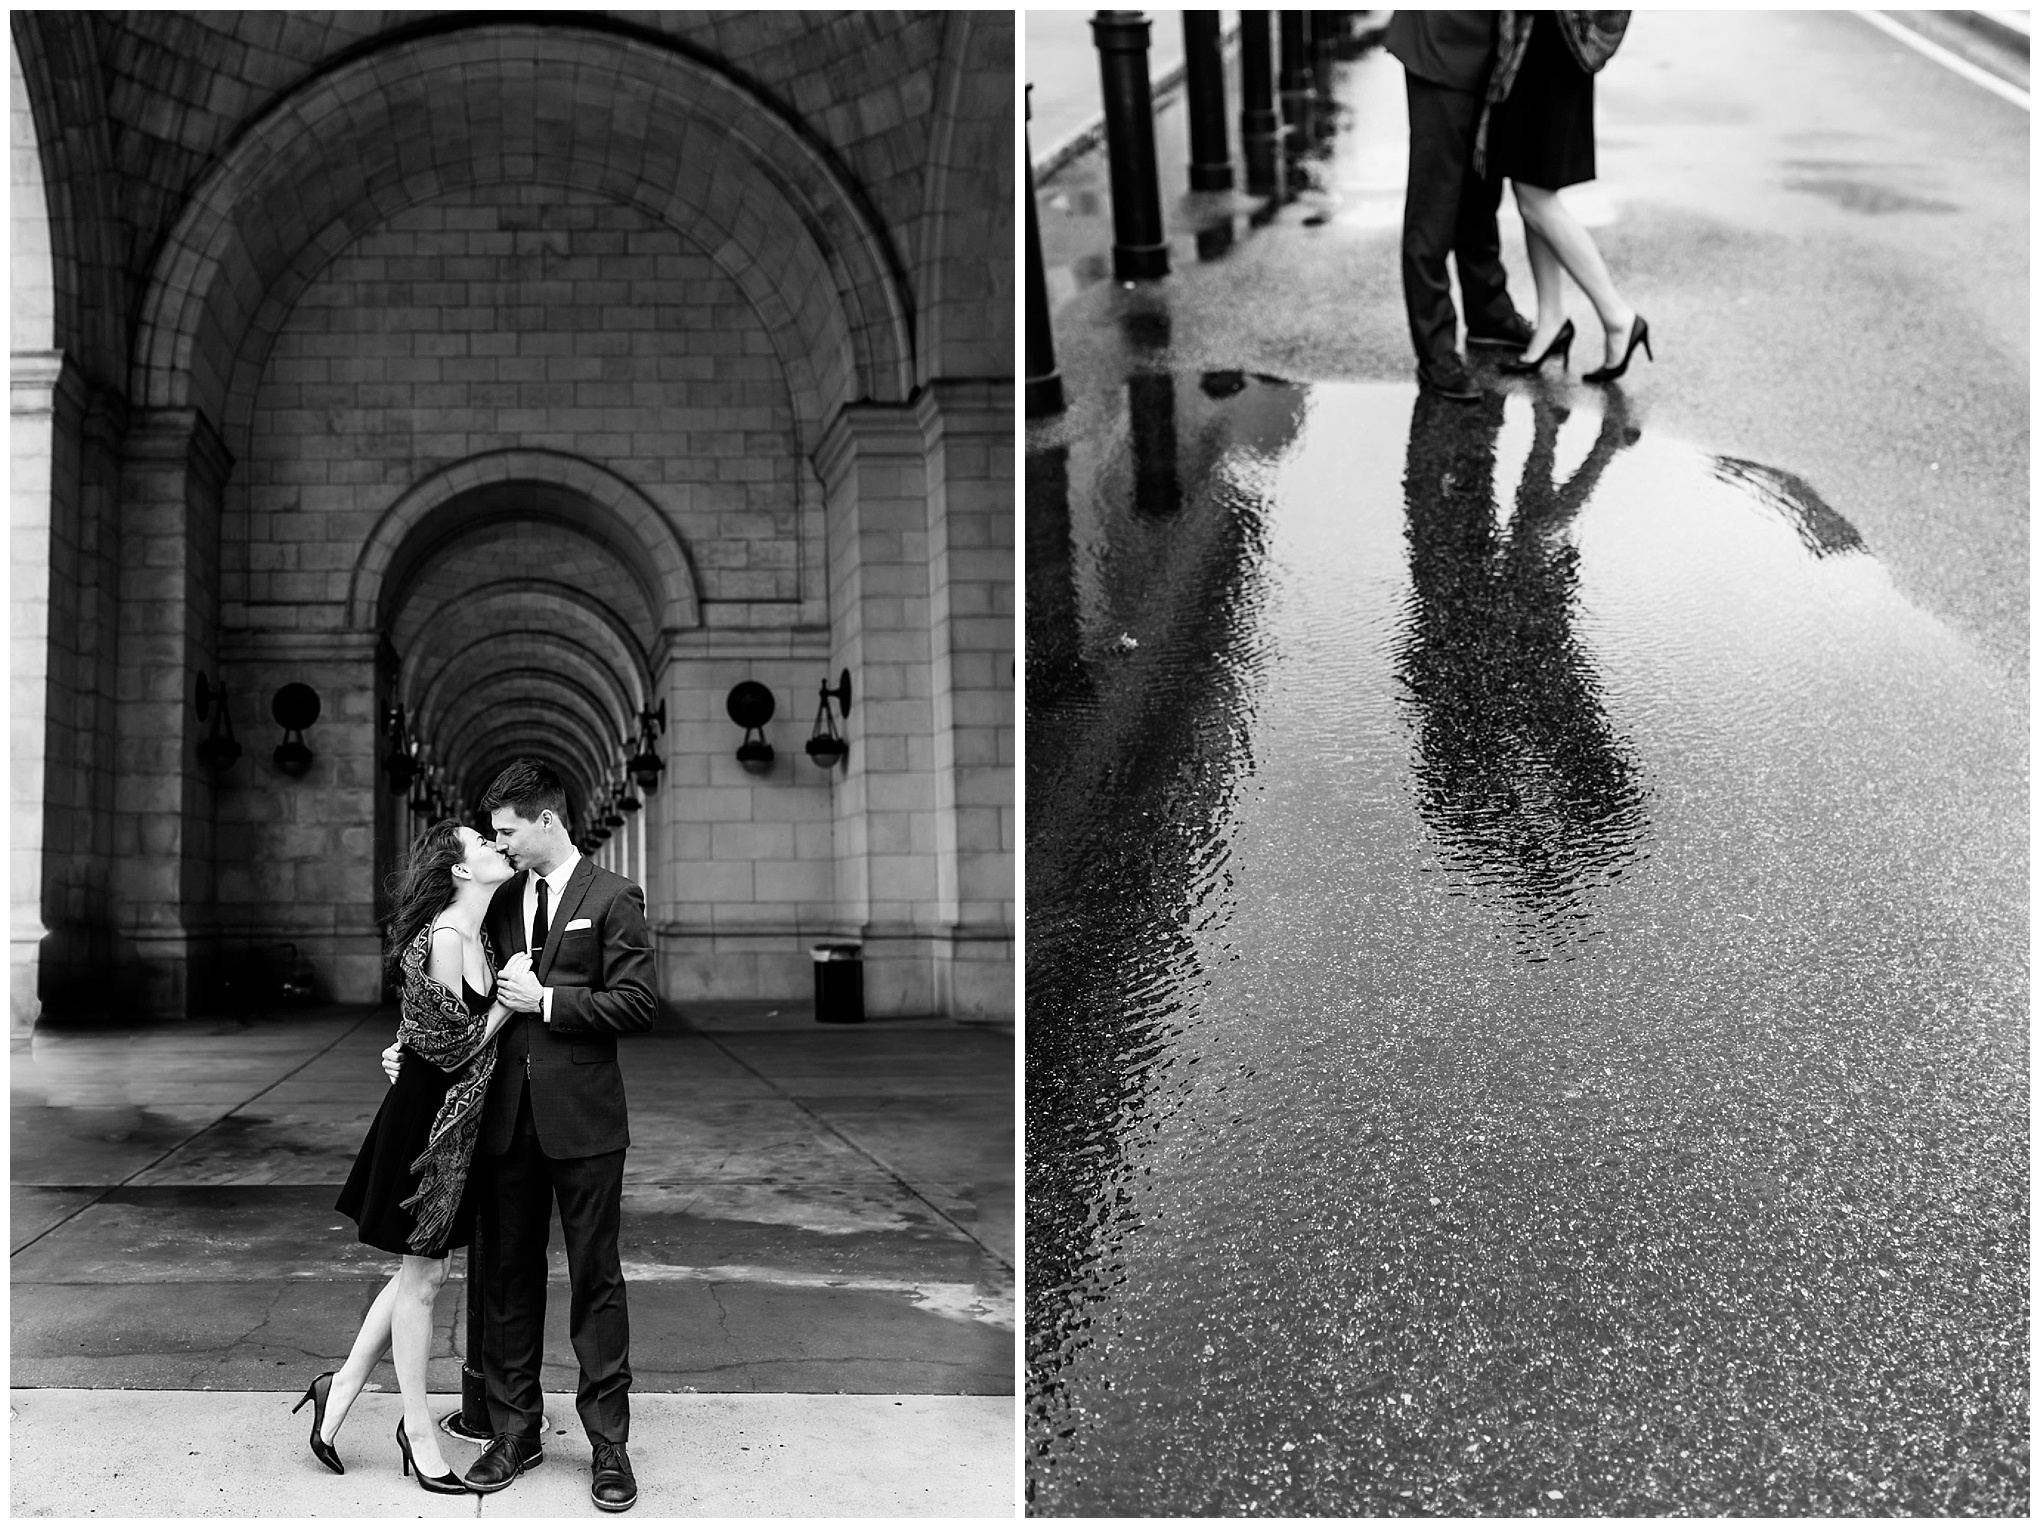 black and white engagement photos, black and white photography, black and white photos, engagement photos, black and white D.C., D.C. engagement photos, classic engagement photos, traditional engagement photos, engagement photos poses, classic architecture, D.C. architecture, Union Station D.C., Union Station, engaged couple, relationship goals, joyful couple, black and white sessions, windblown, romantic portraits, archways, couple kissing, reflection